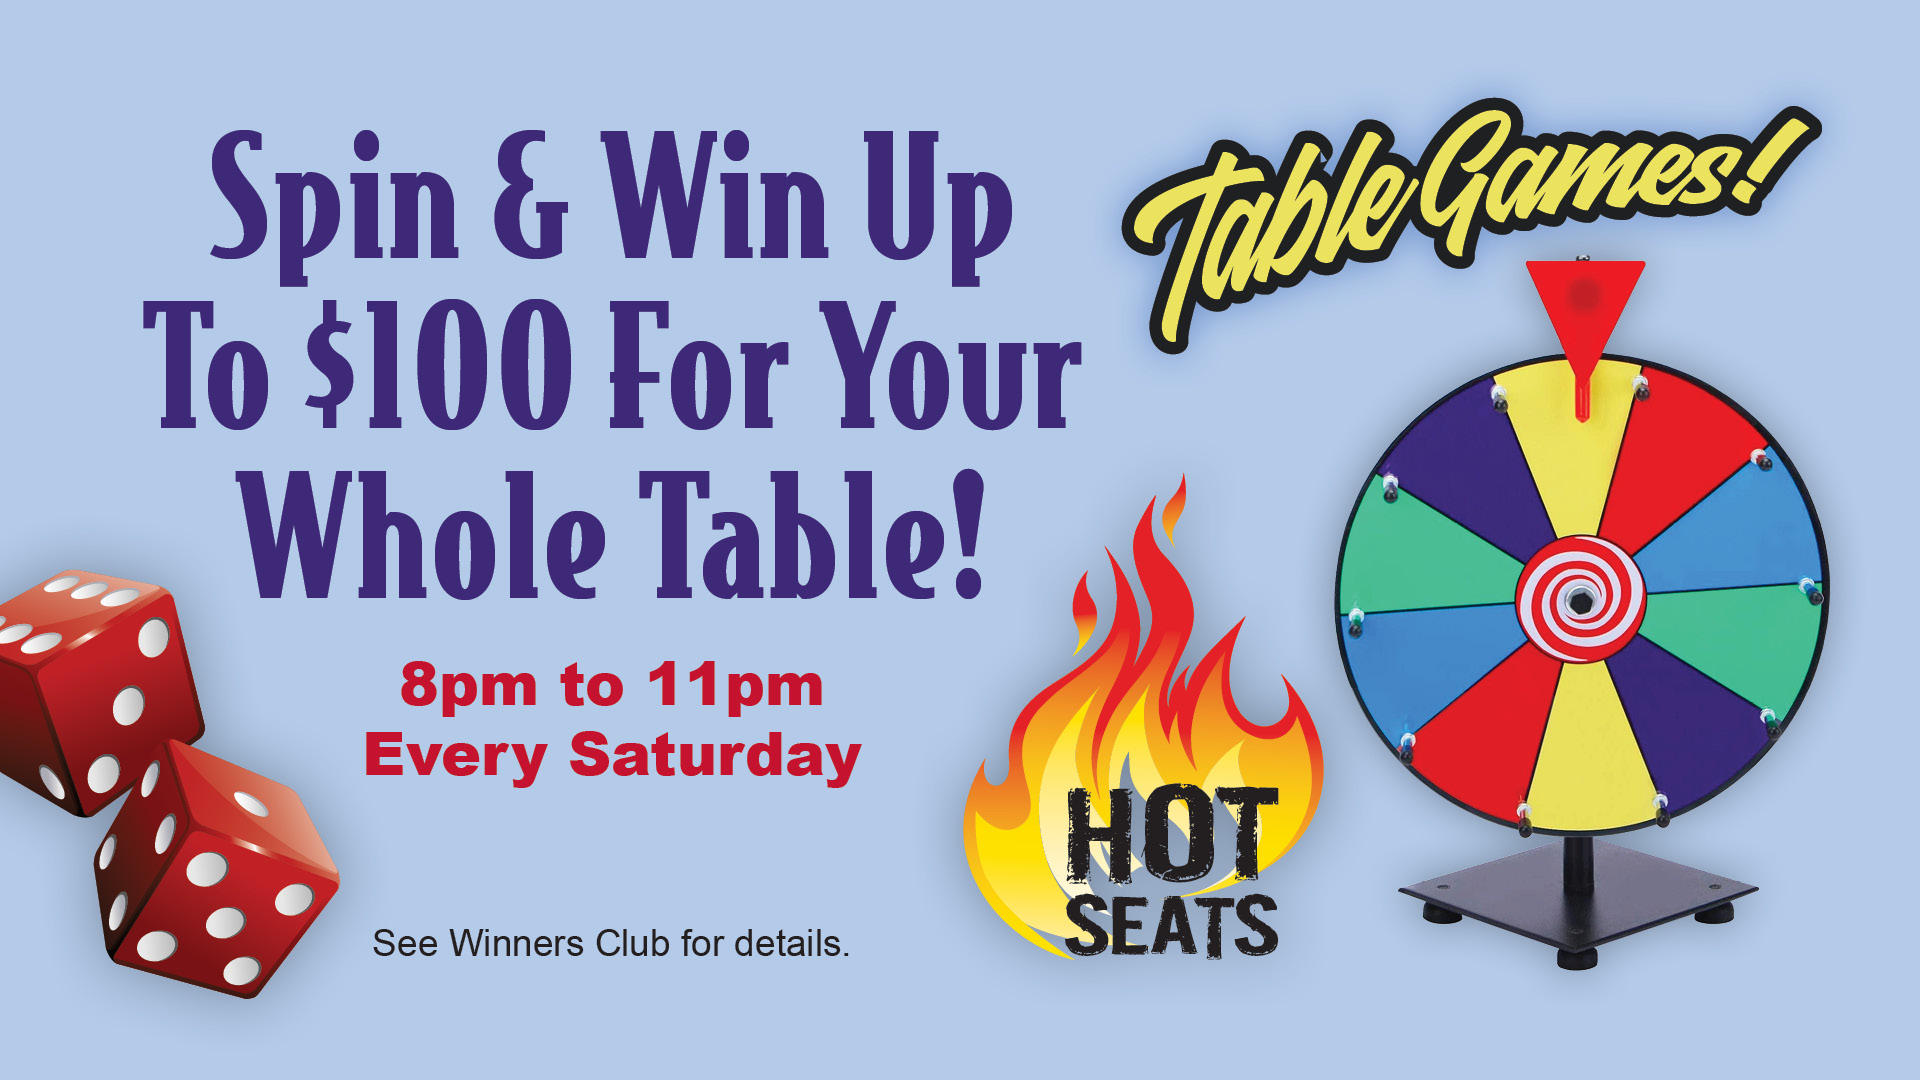 Table Games! Hot Seats - Spin & Win up to $100 for your whole table! 8pm to 11pm every Saturday. See Winners Club for details.